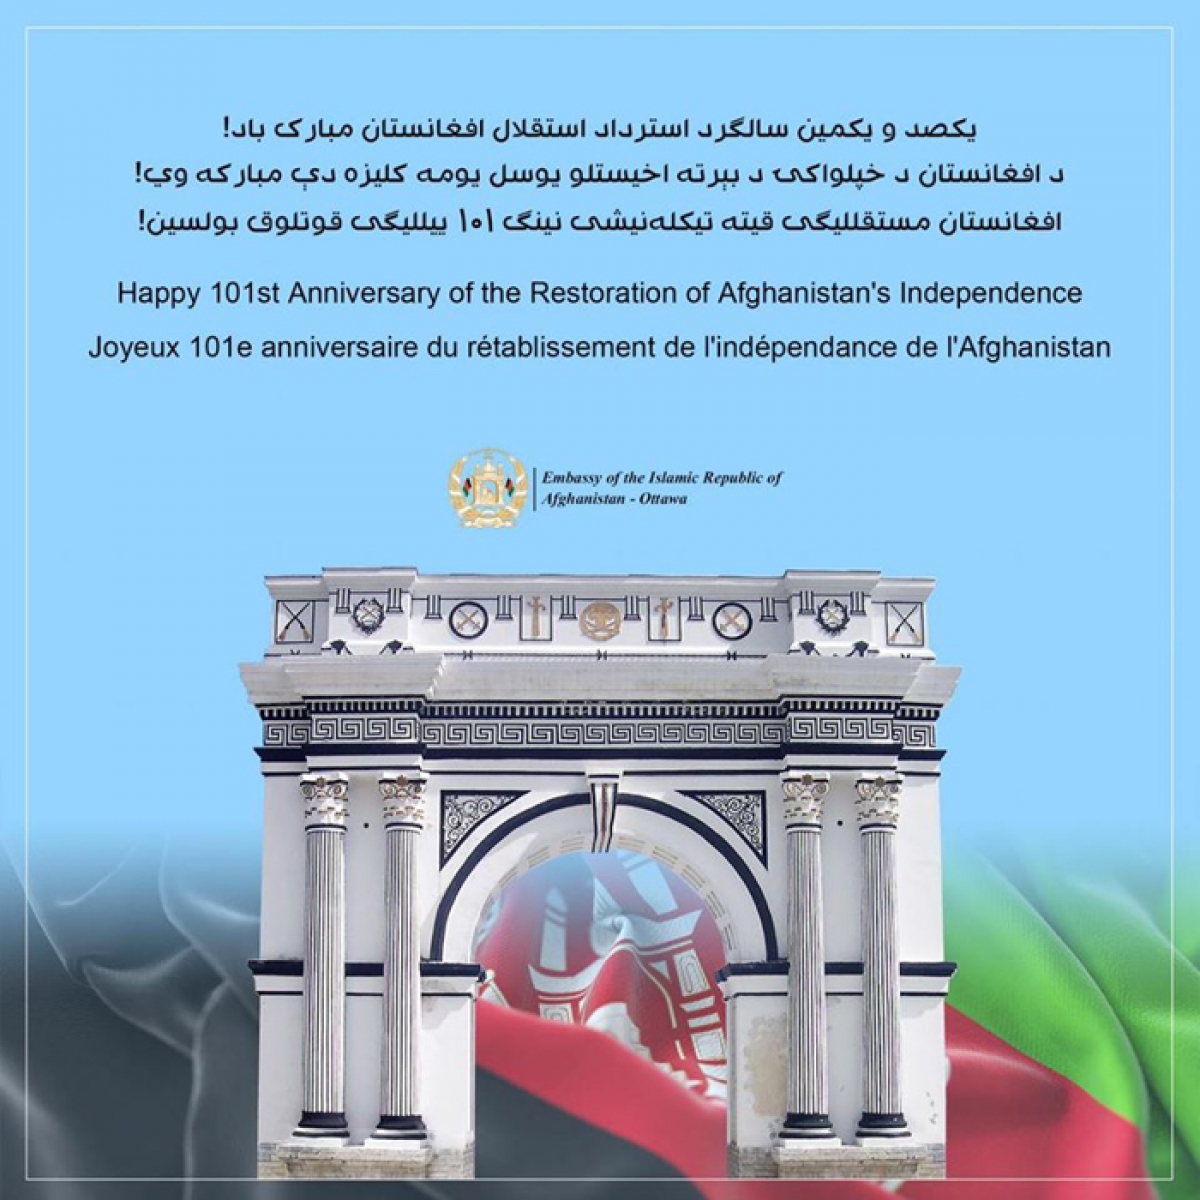 Message by Ambassador Hassan Soroosh on the 101st Anniversary of the Restoration of Afghanistan’s Independence